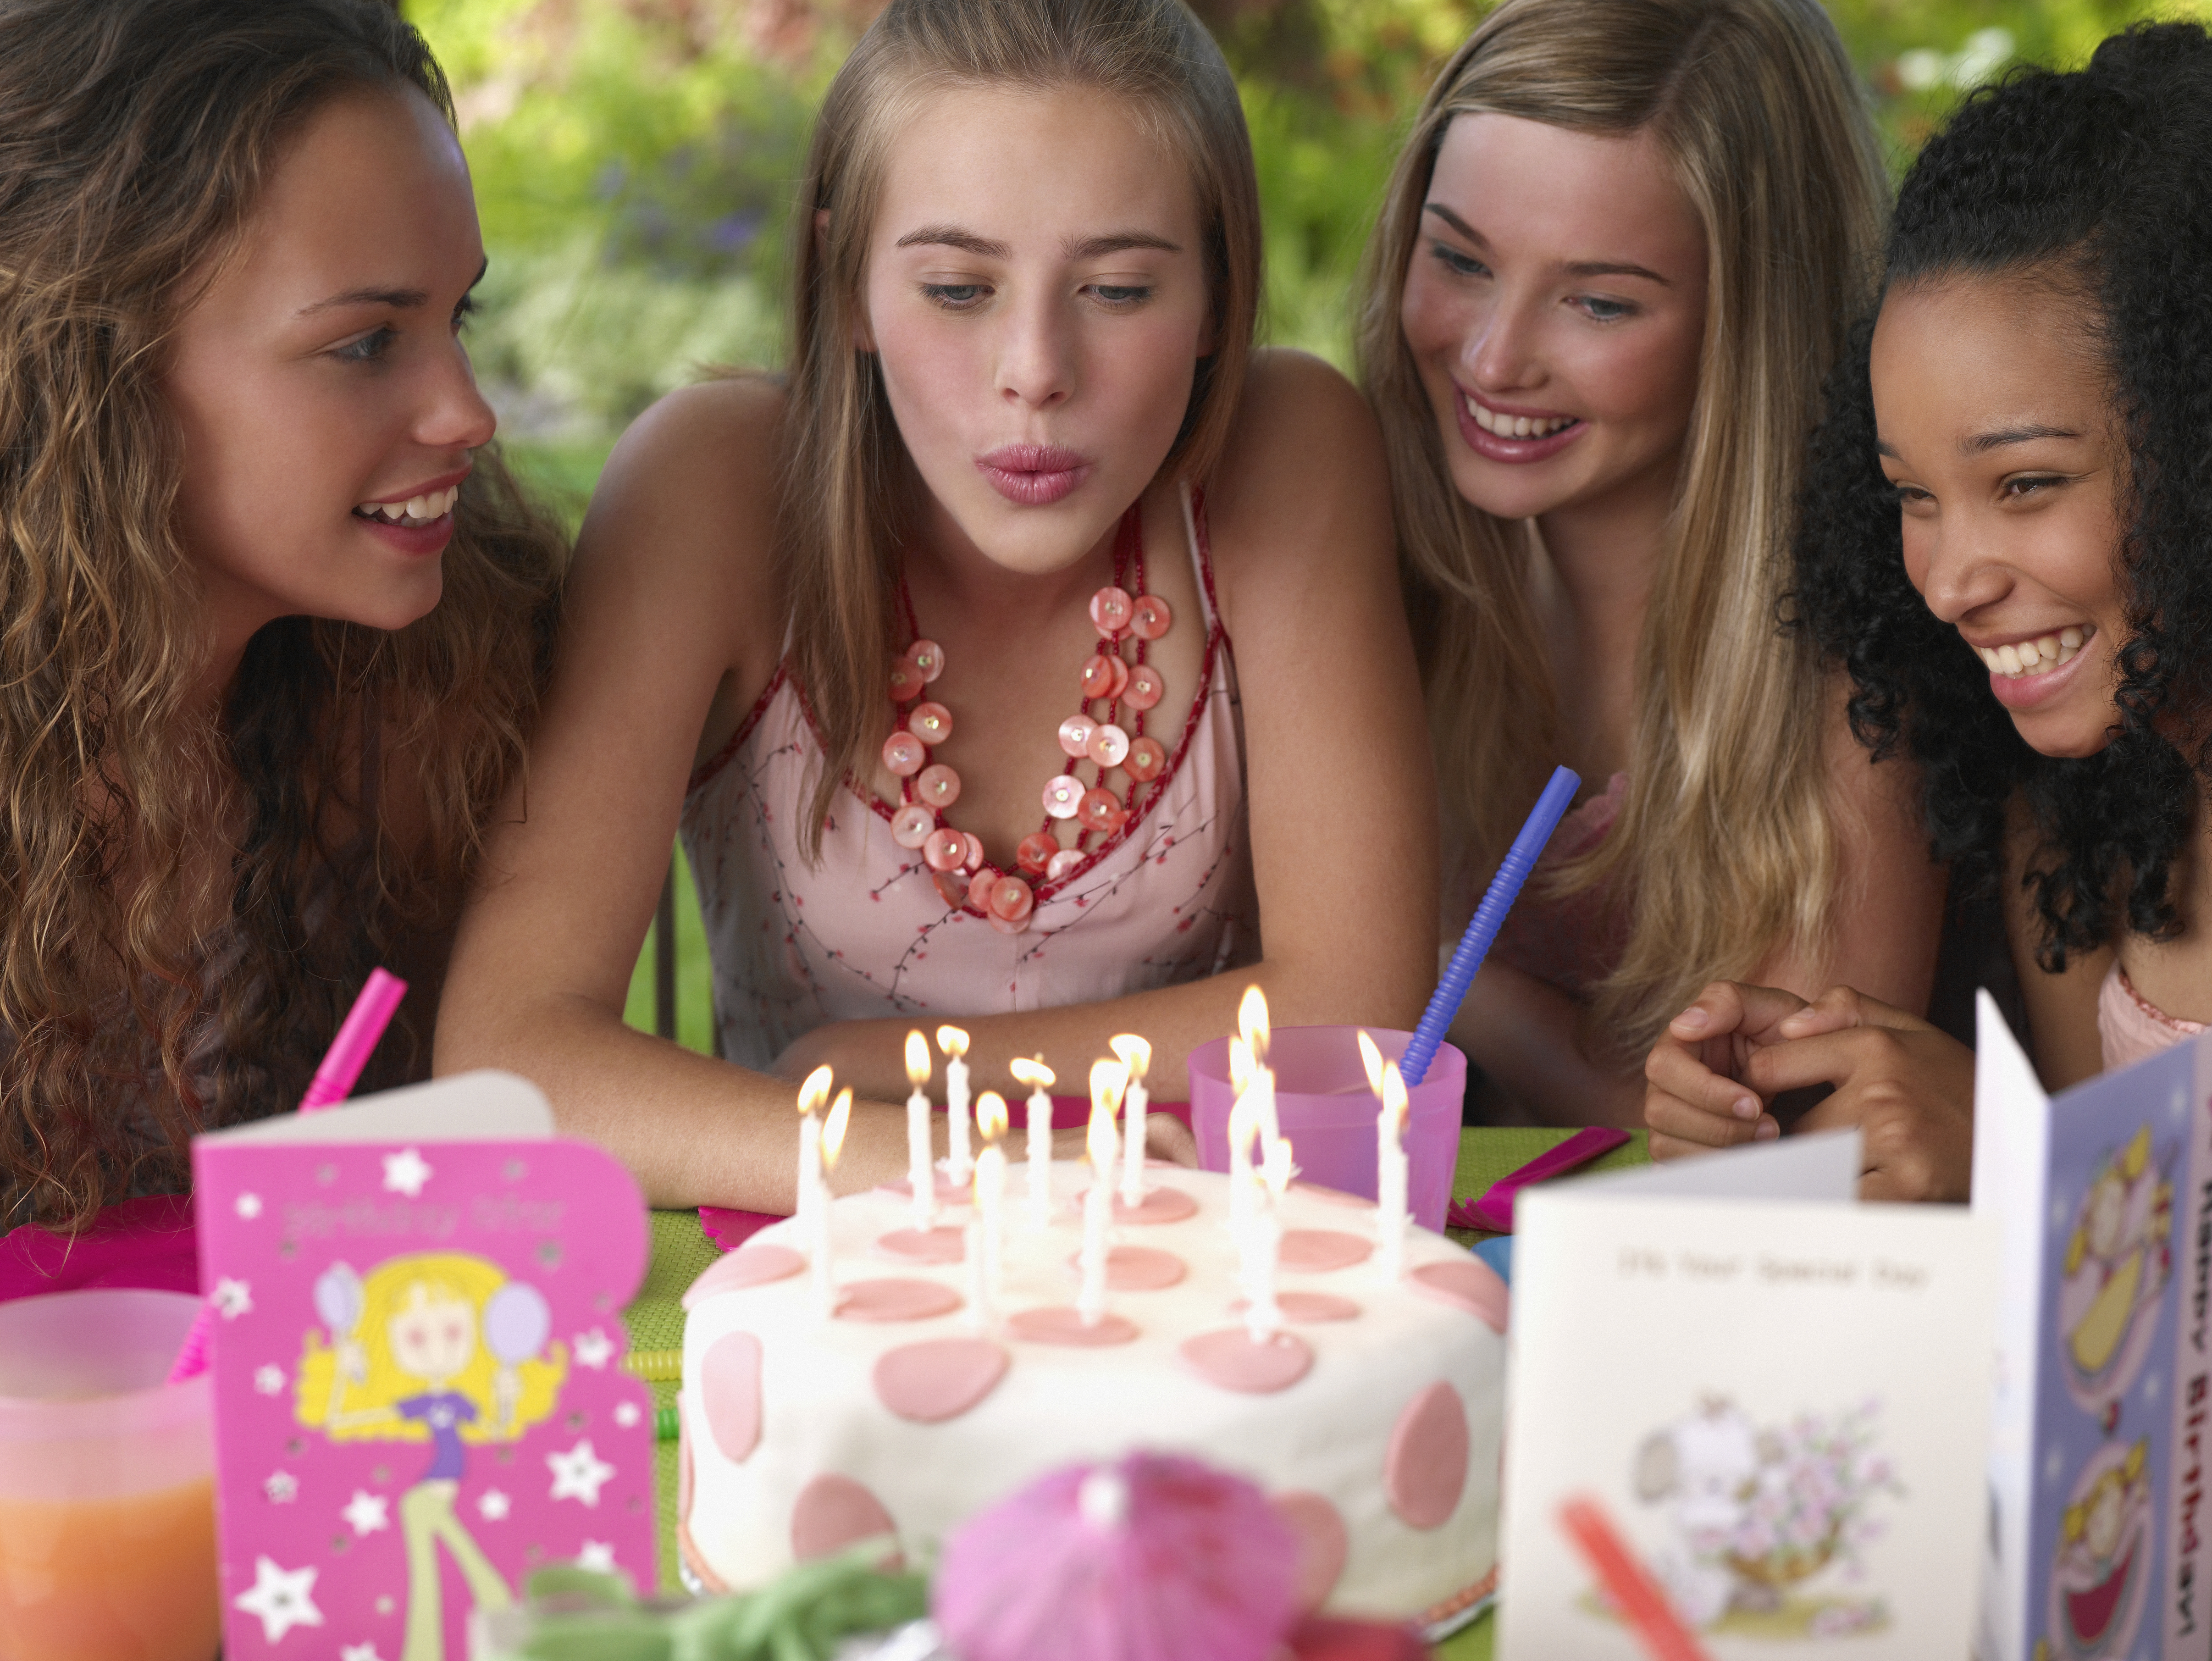 Four teenage girls at birthday party smiling outdoors | Source: Getty Images